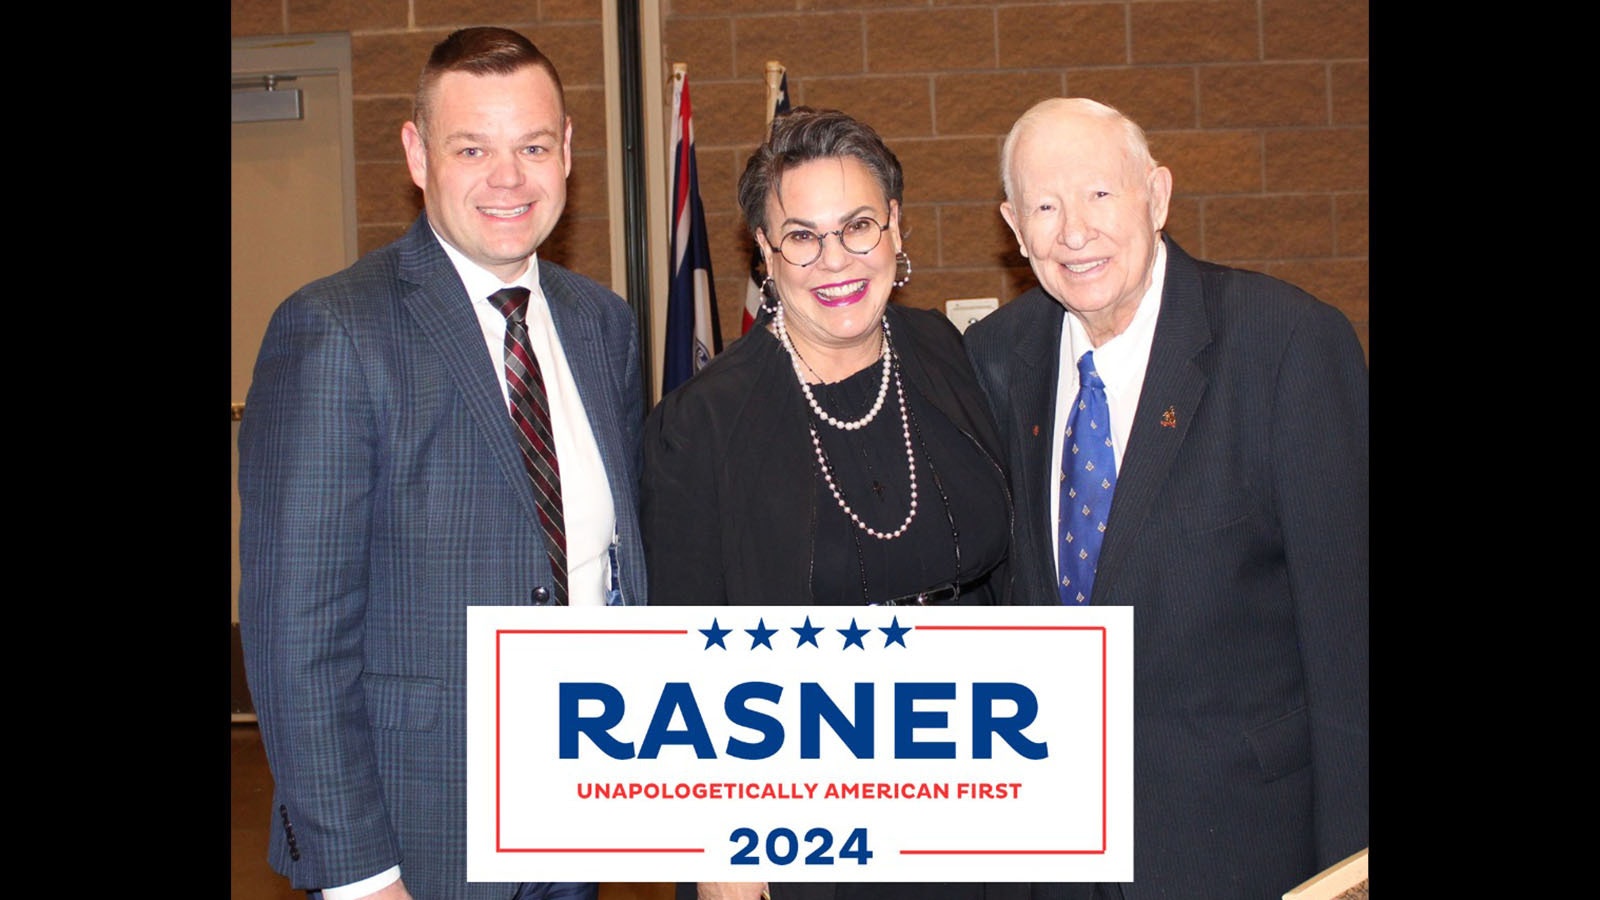 This photo showing U.S. Senate candidate Reid Rasner, left, with U.S. Rep. Harriet Hageman, center — and others like it — have prompted a lawyer for Hageman to send Rasner a cease and desist letter, saying the photos give the impression Hageman has endorsed Rasner in his campaign against Sen. John Barrasso.